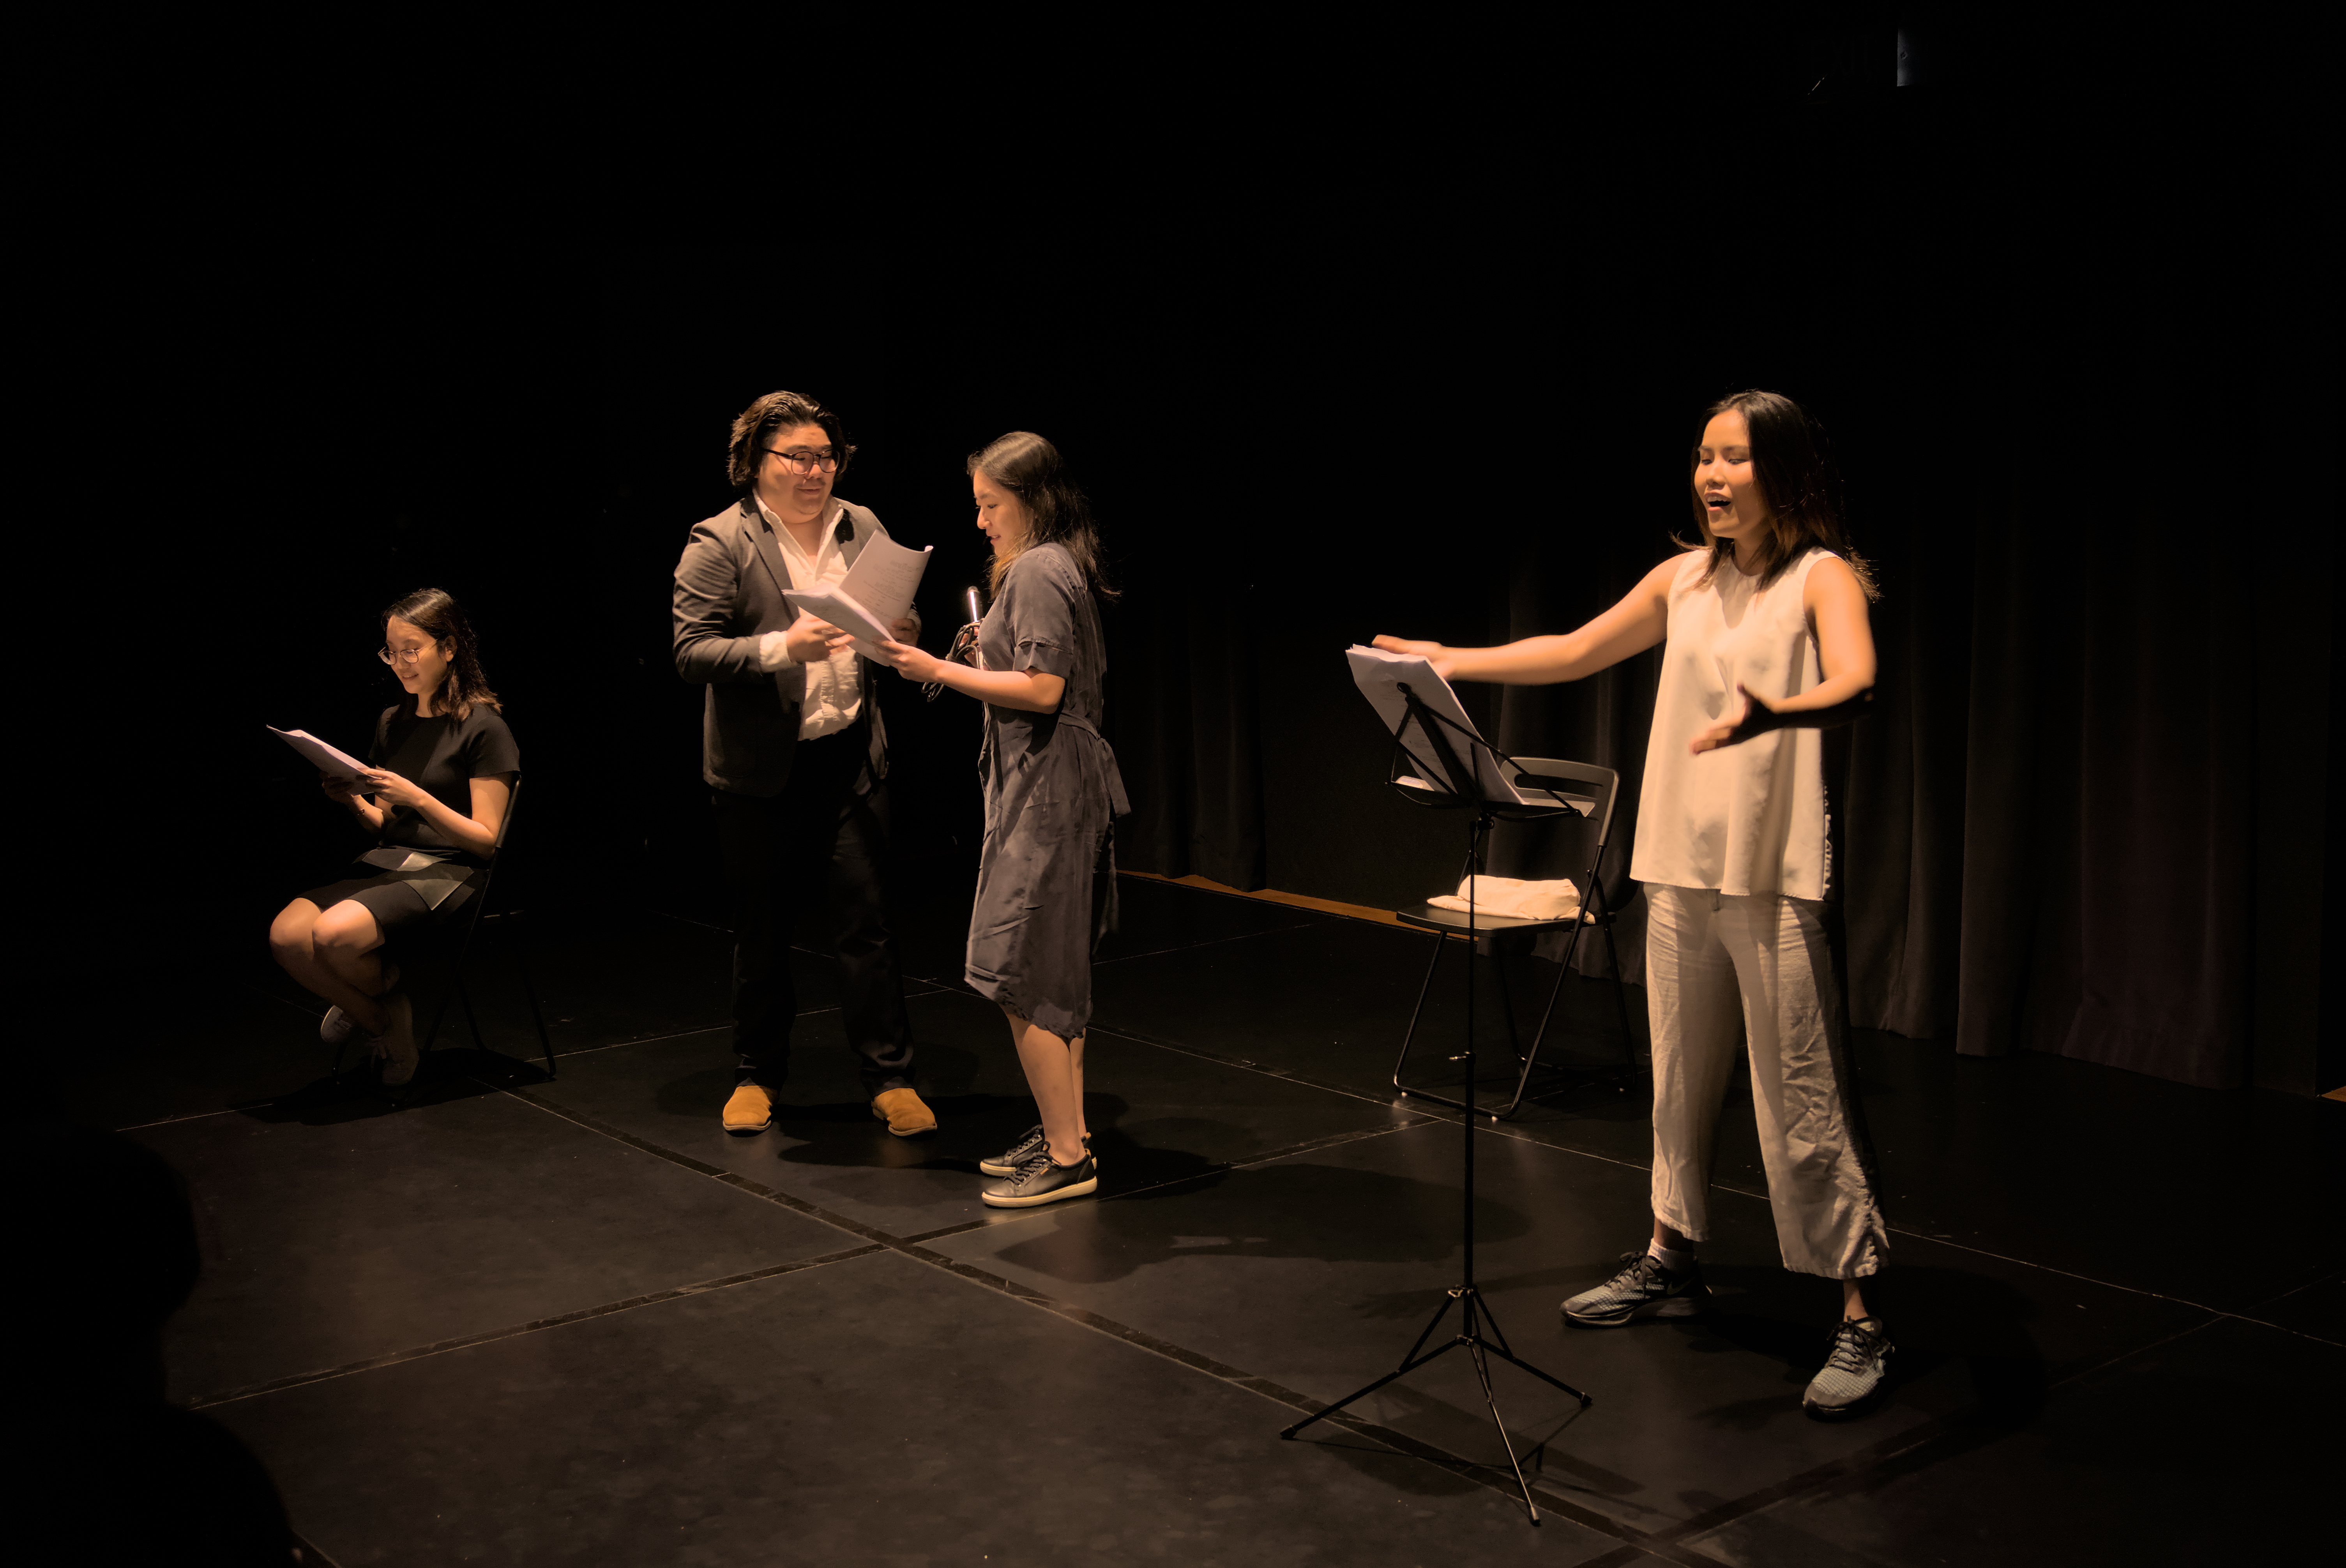 From left to right, Mary Tay is seated and reading from a script, Nicholas Chen is speaking to Claire Tay, and Rachel Chin is standing on the far end with her arms outstretched.